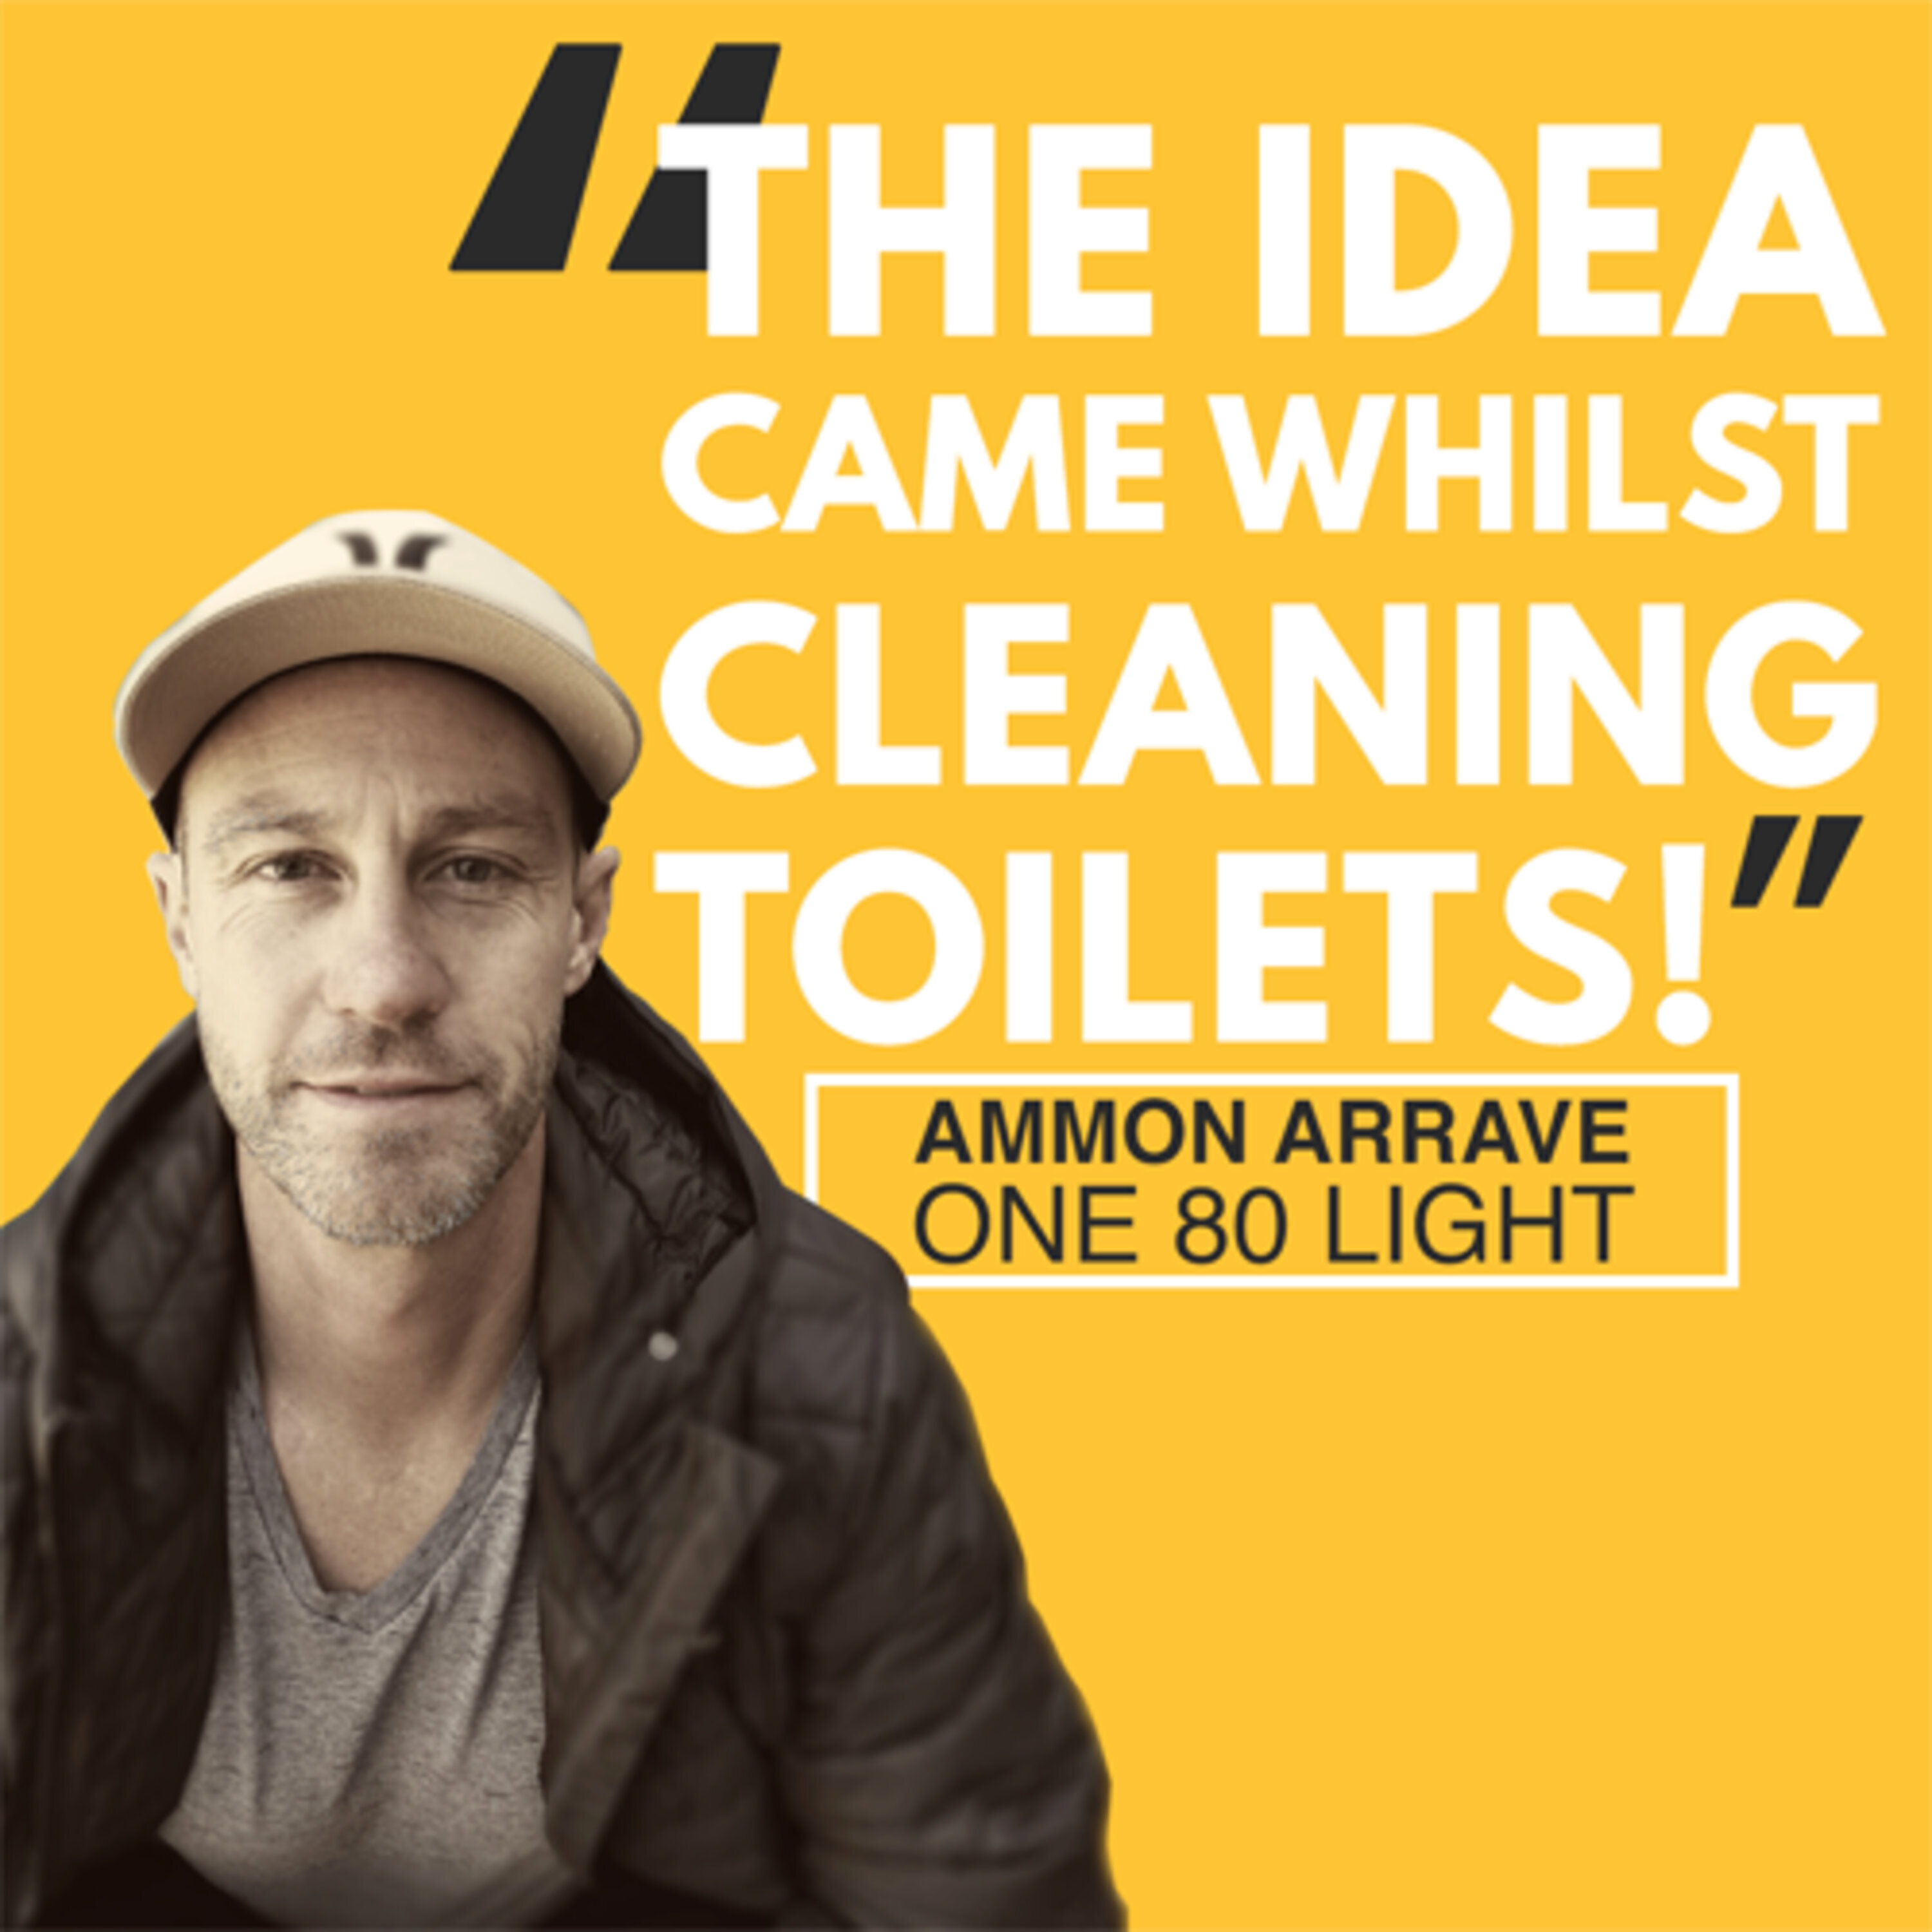 Ex-toilet cleaner turned product developer Ammon Arrave on how he came to invent the One 80 Light | #483